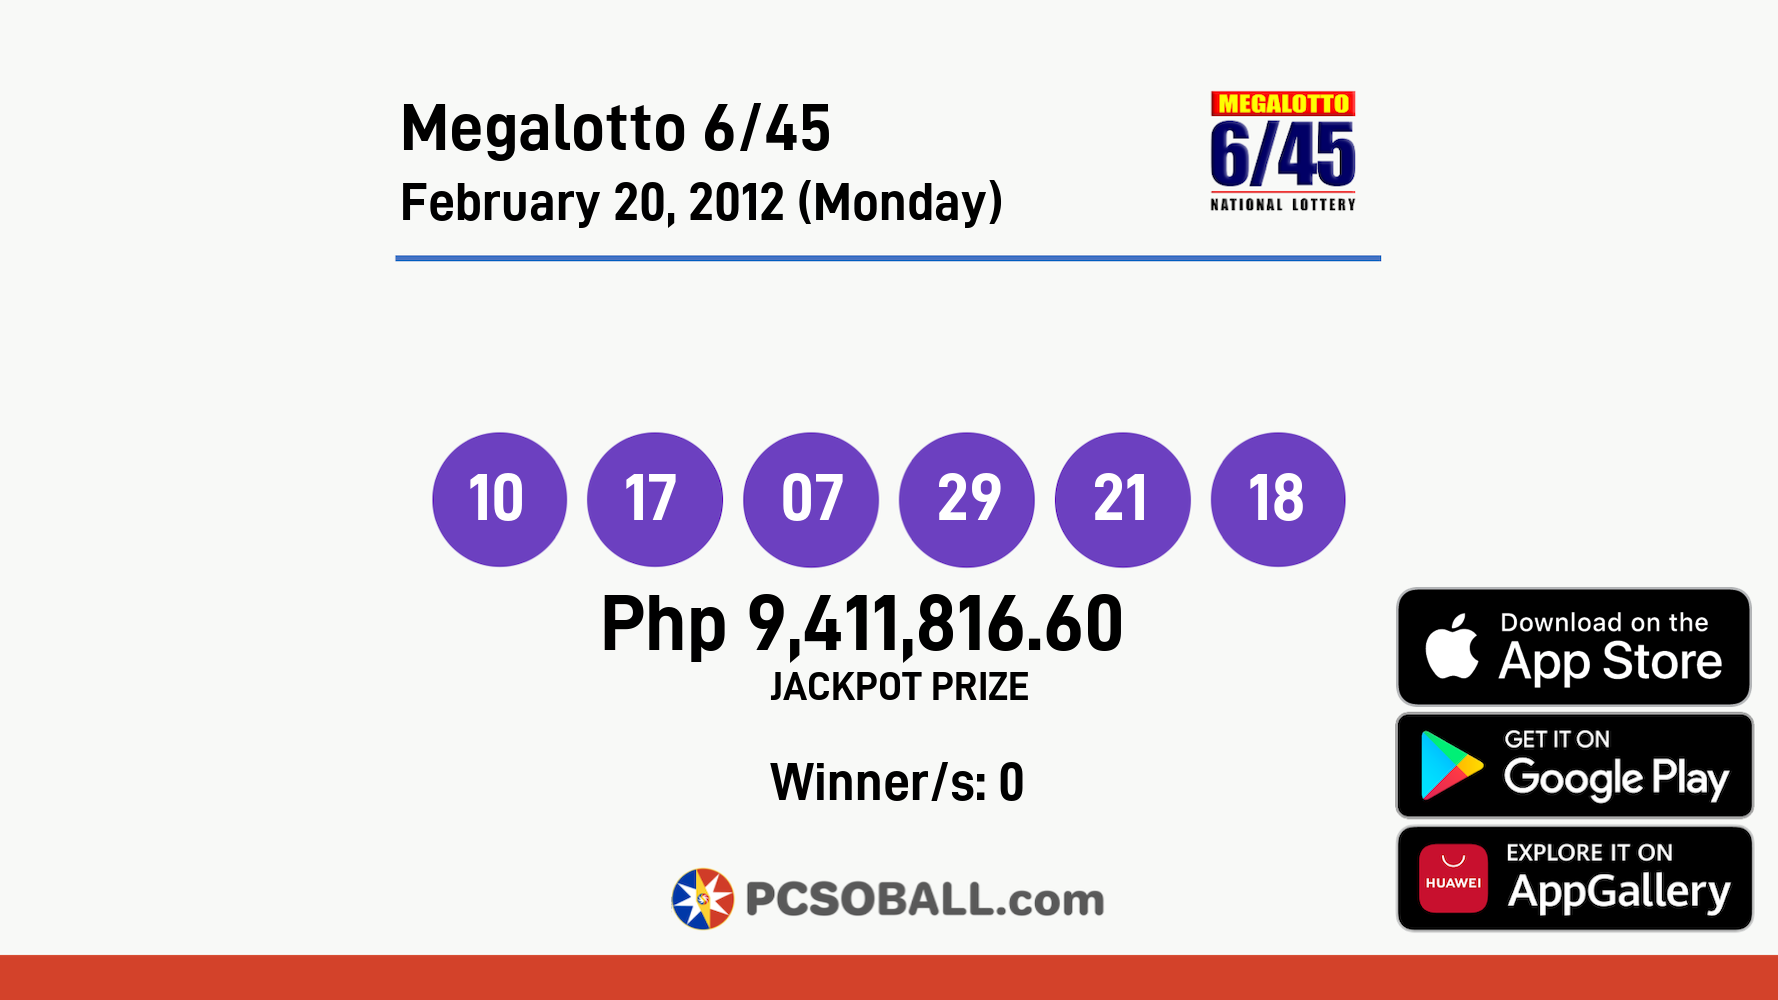 Megalotto 6/45 February 20, 2012 (Monday) Result